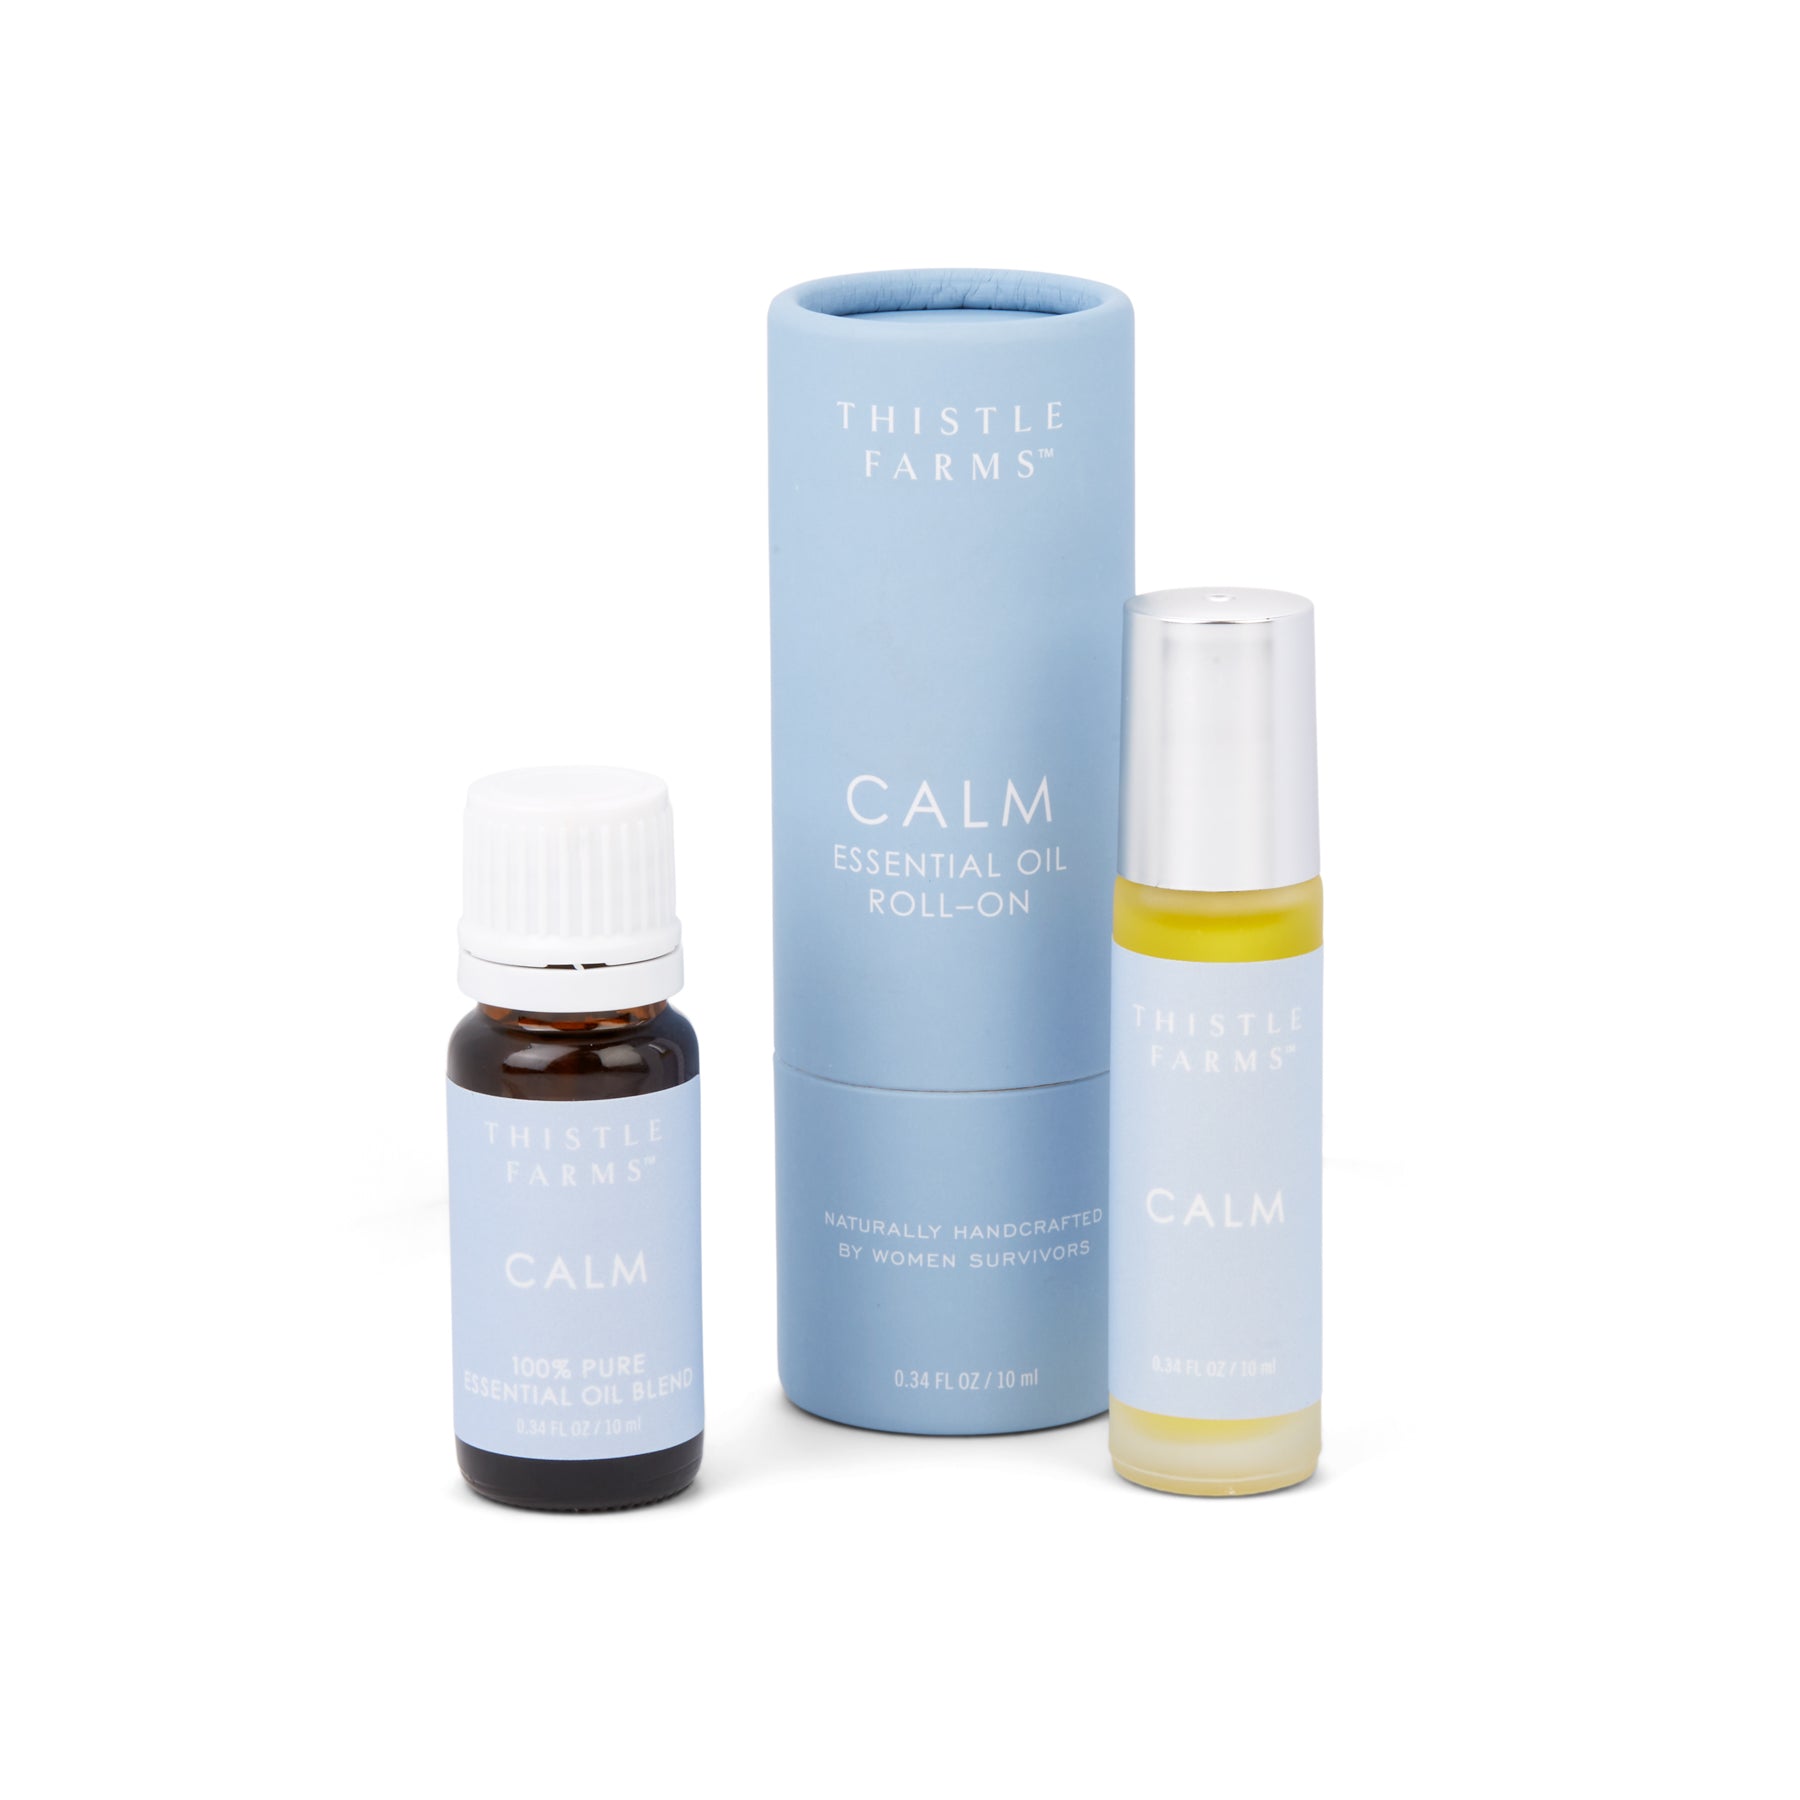 Calm Roll On Essential Healing Oil | Thistle Farms - Thistle